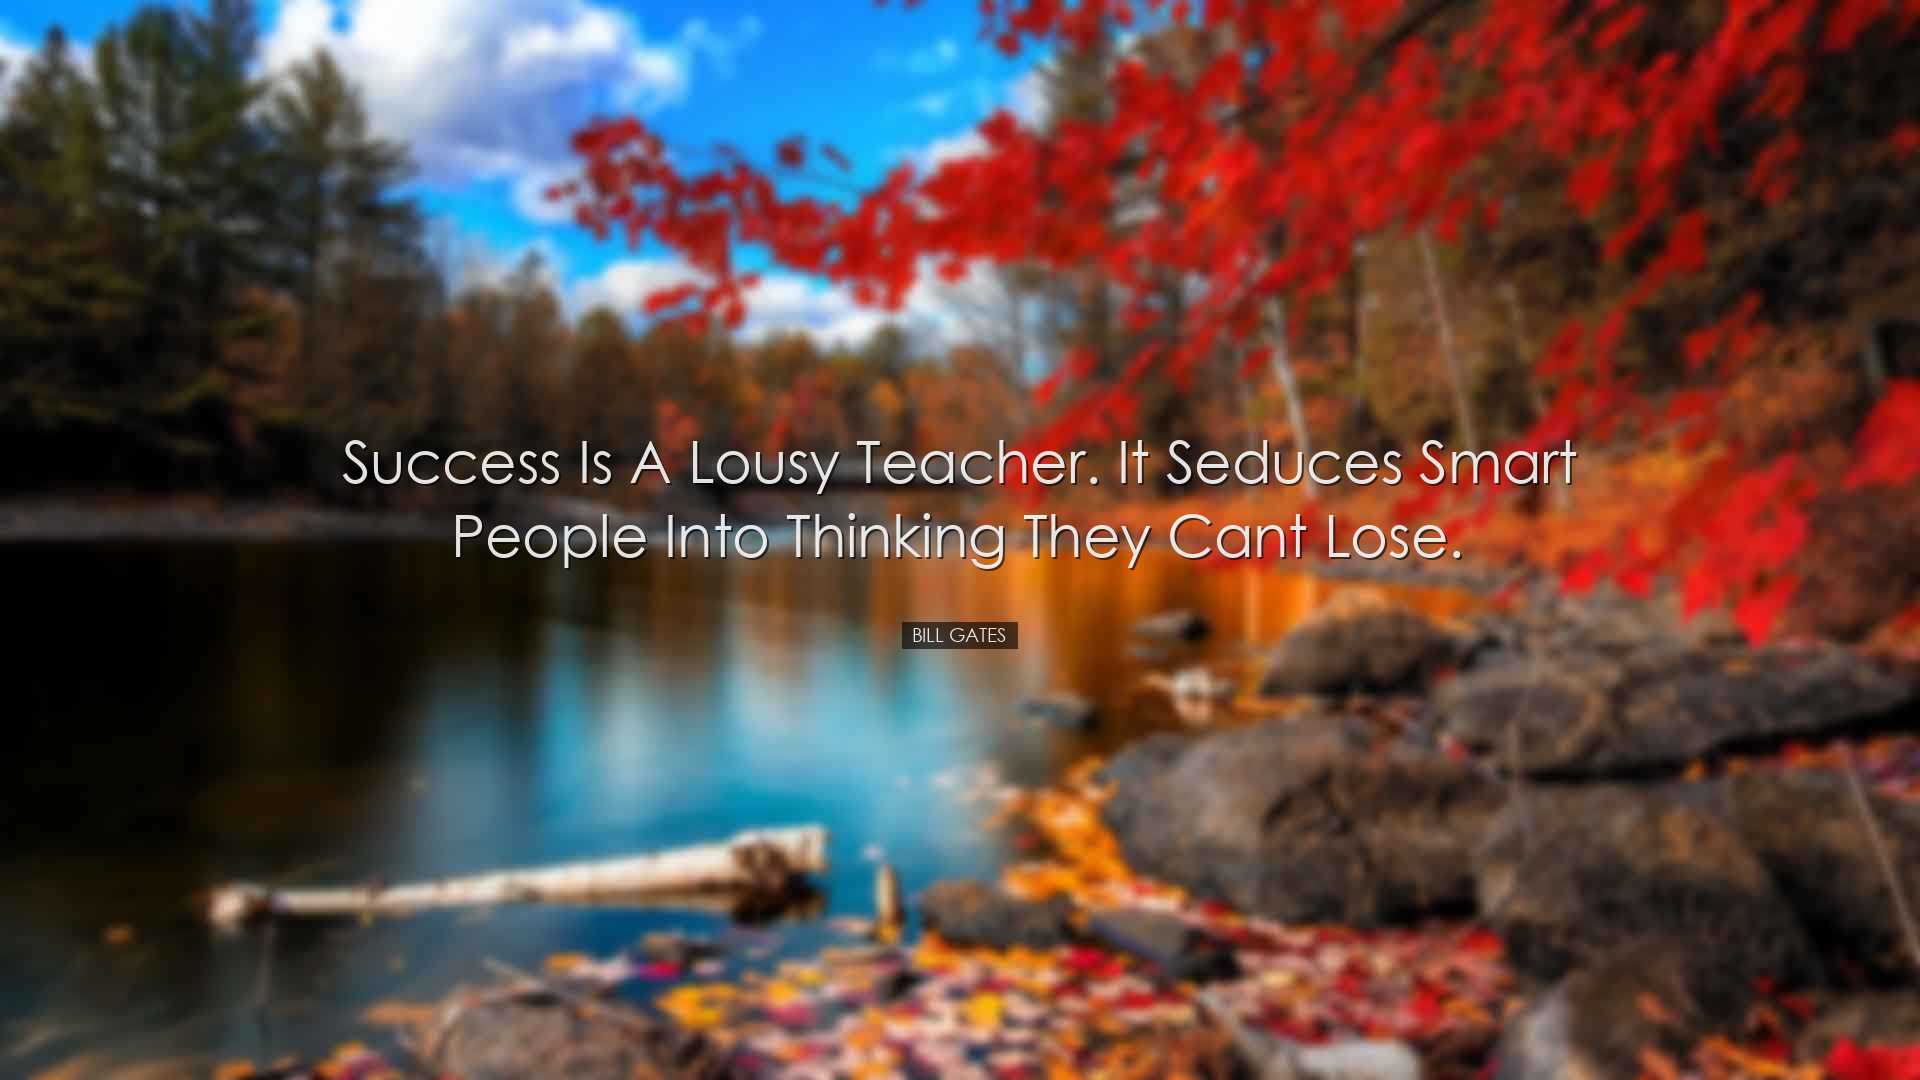 Success is a lousy teacher. It seduces smart people into thinking